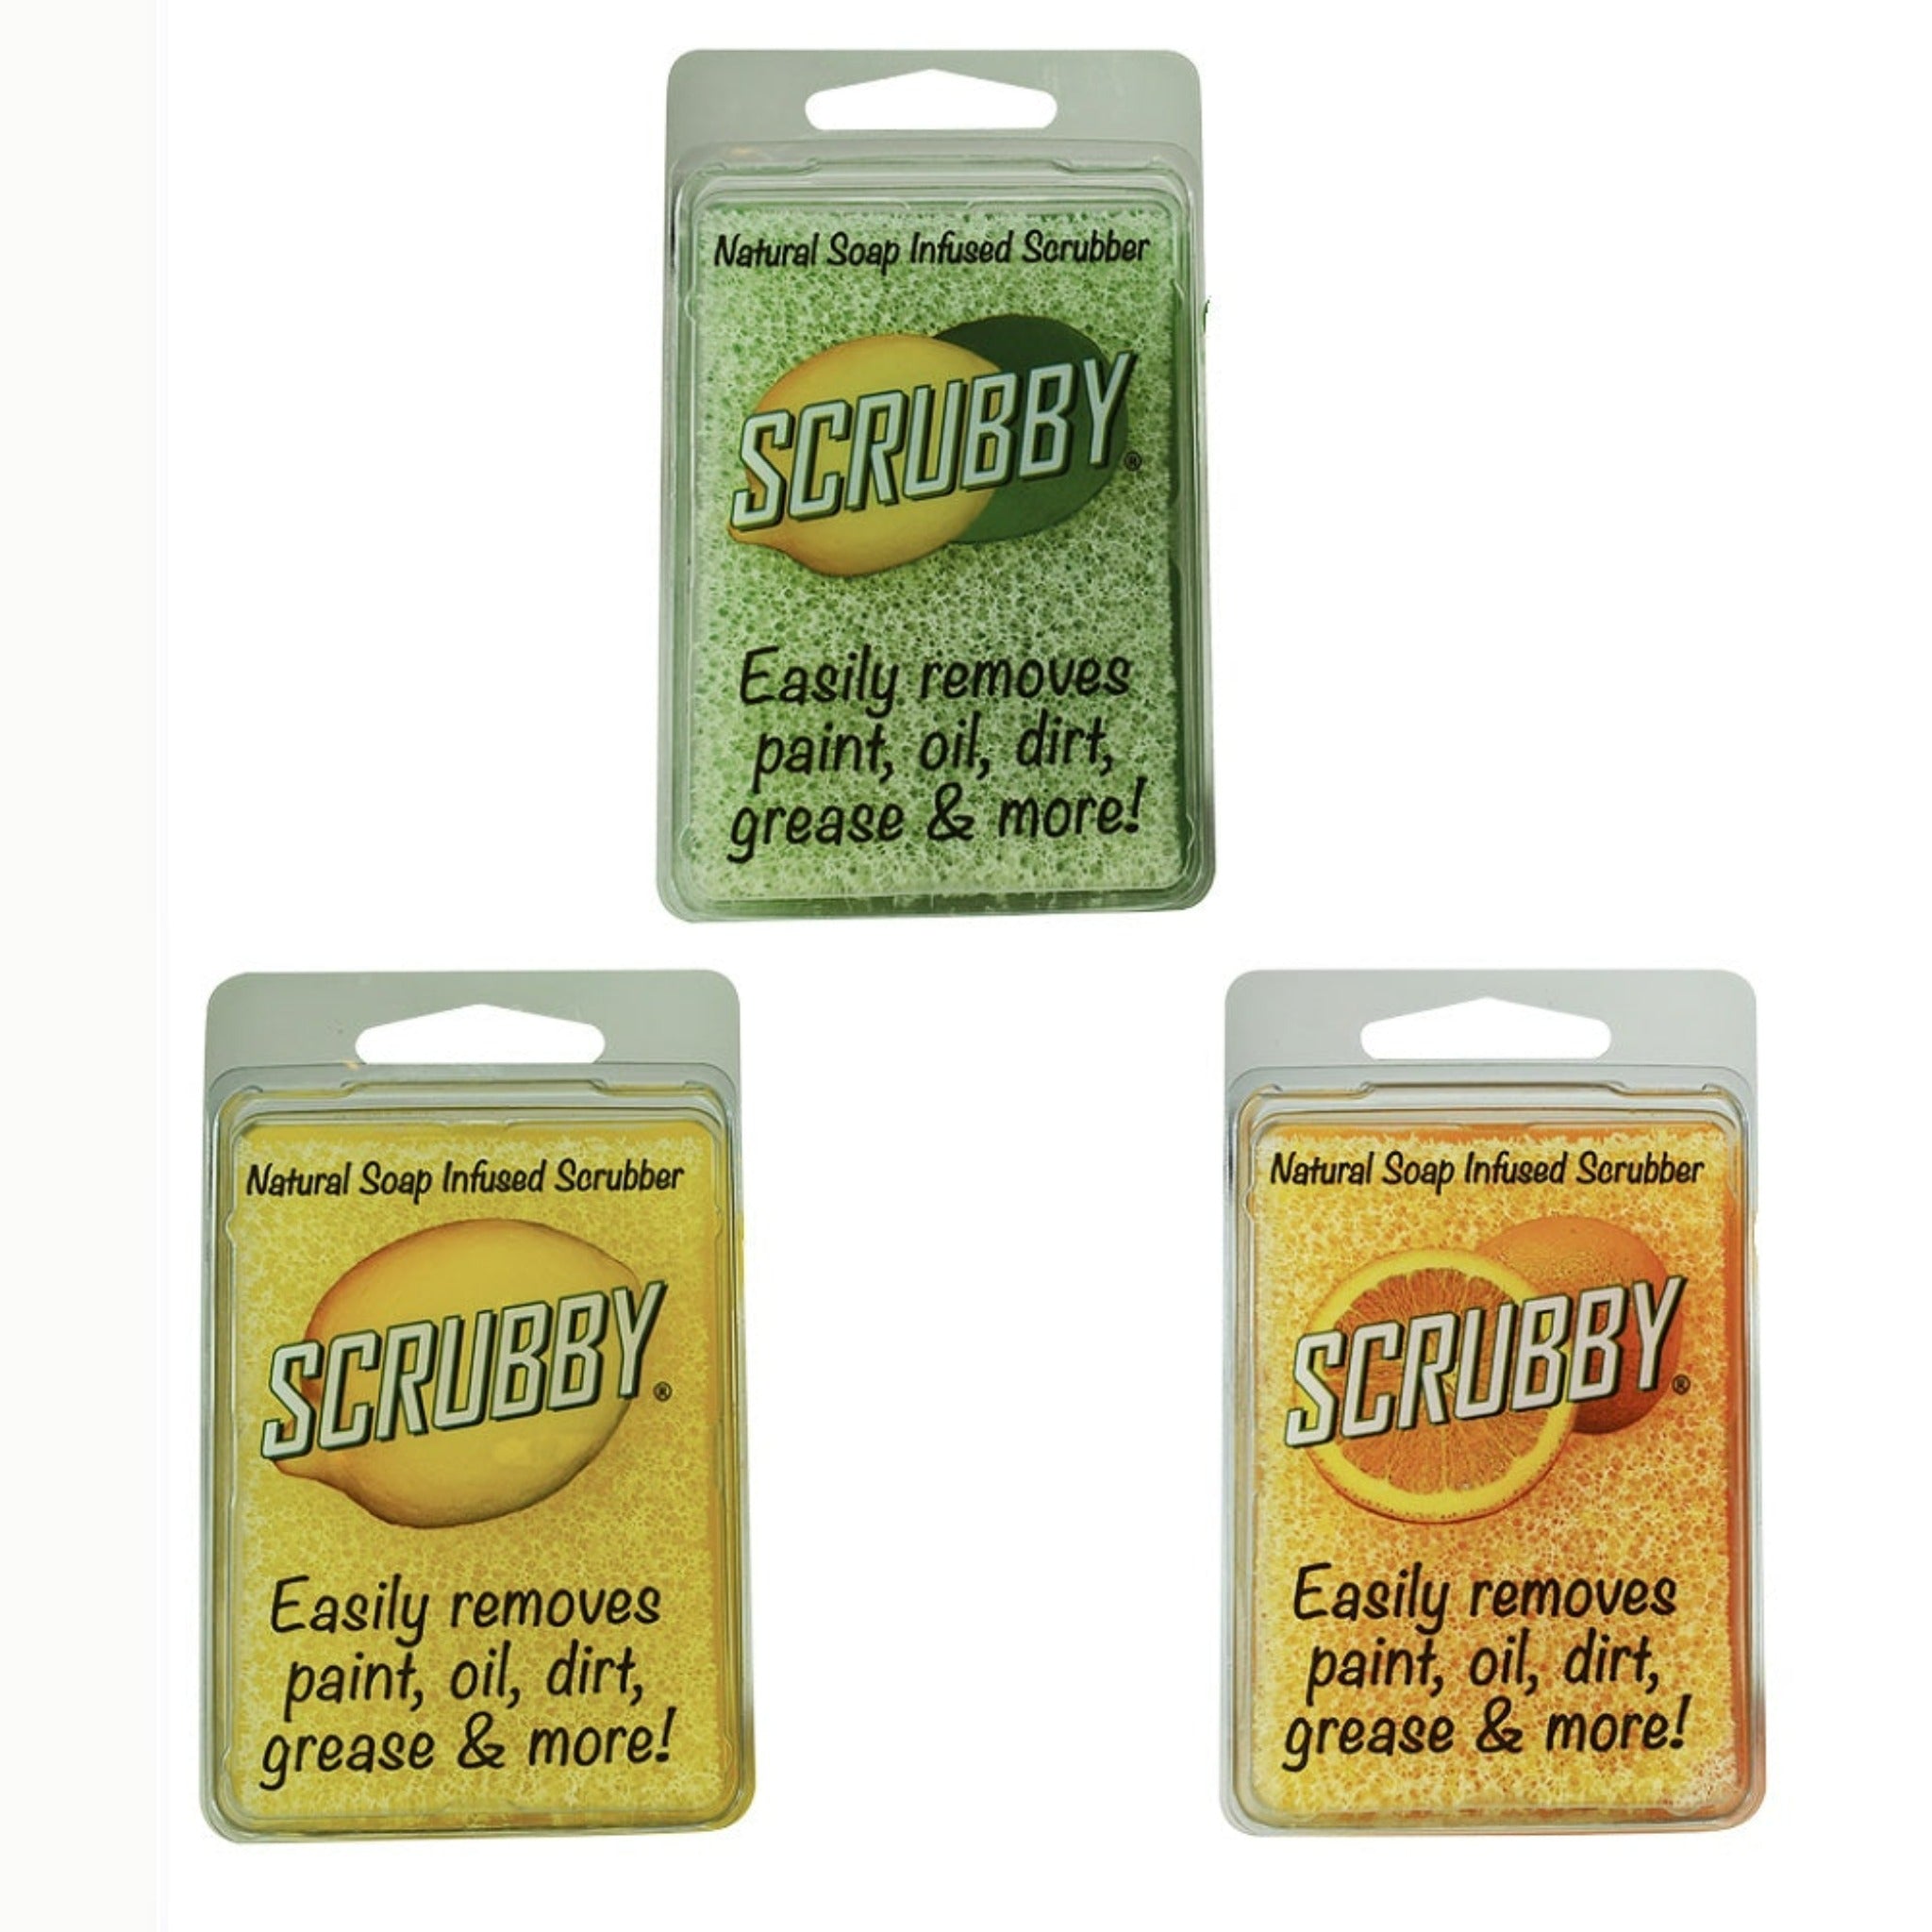 3 packages of lime, lemon, and orange scented Scrubby soap infused sponges that say Natural Soap Infused Scrubber. Easily removes, paint, oil, dirt, grease, & more!